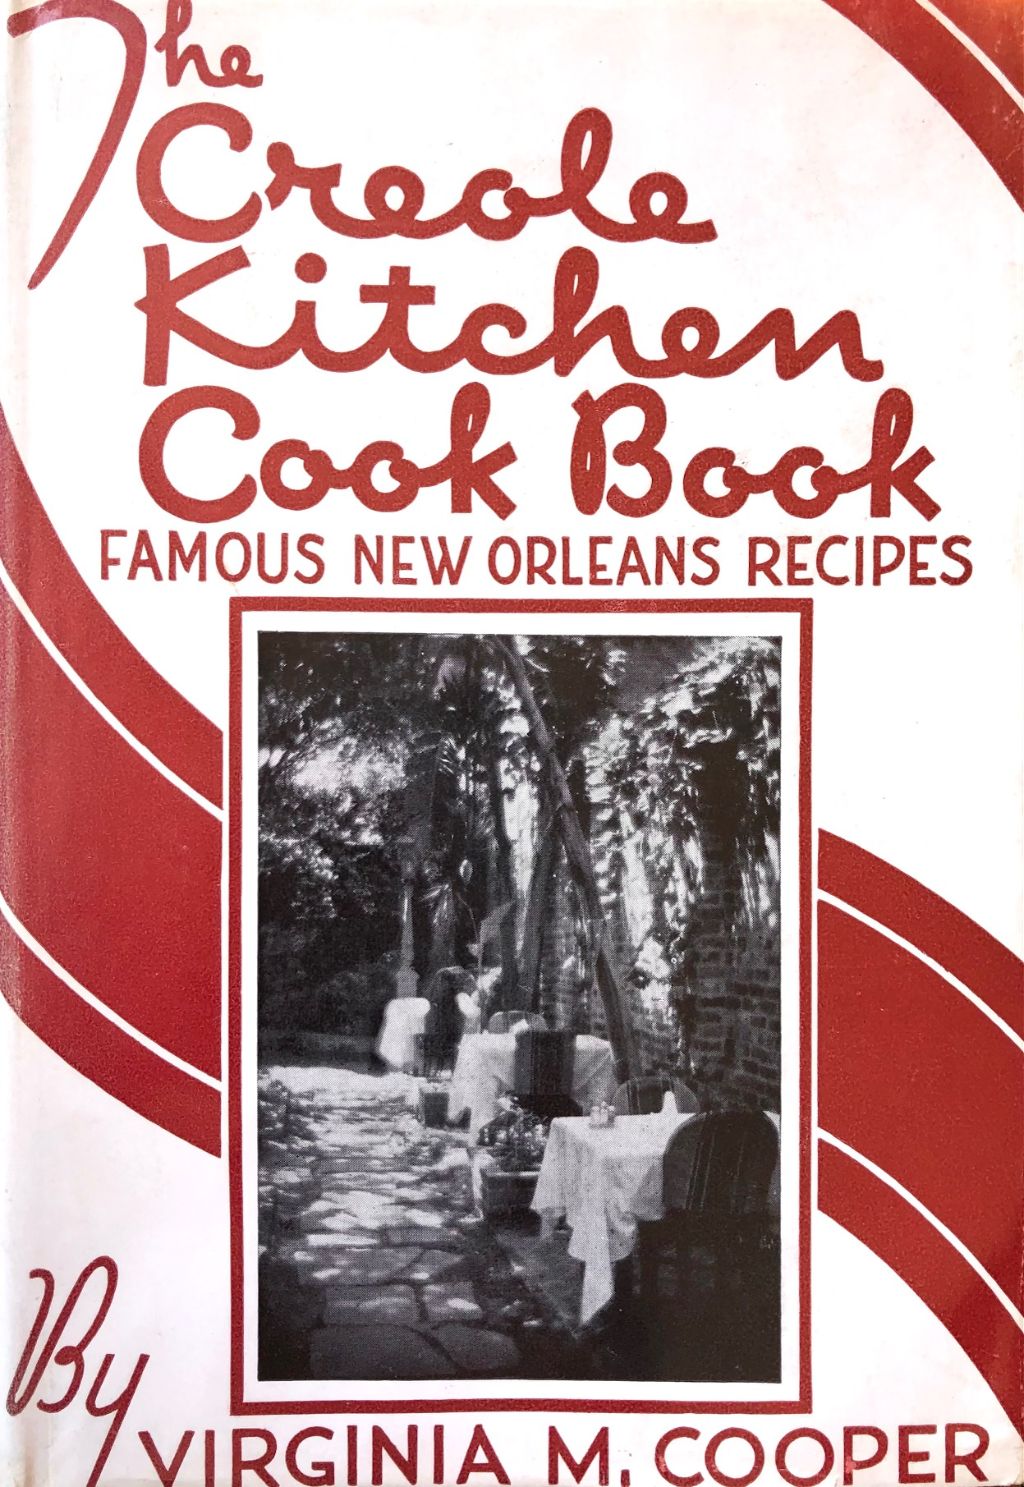 (*NEW ARRIVAL*) (Southern - New Orleans) Virginia M. Cooper. The Creole Kitchen Cook Book: Famous New Orleans Recipes.